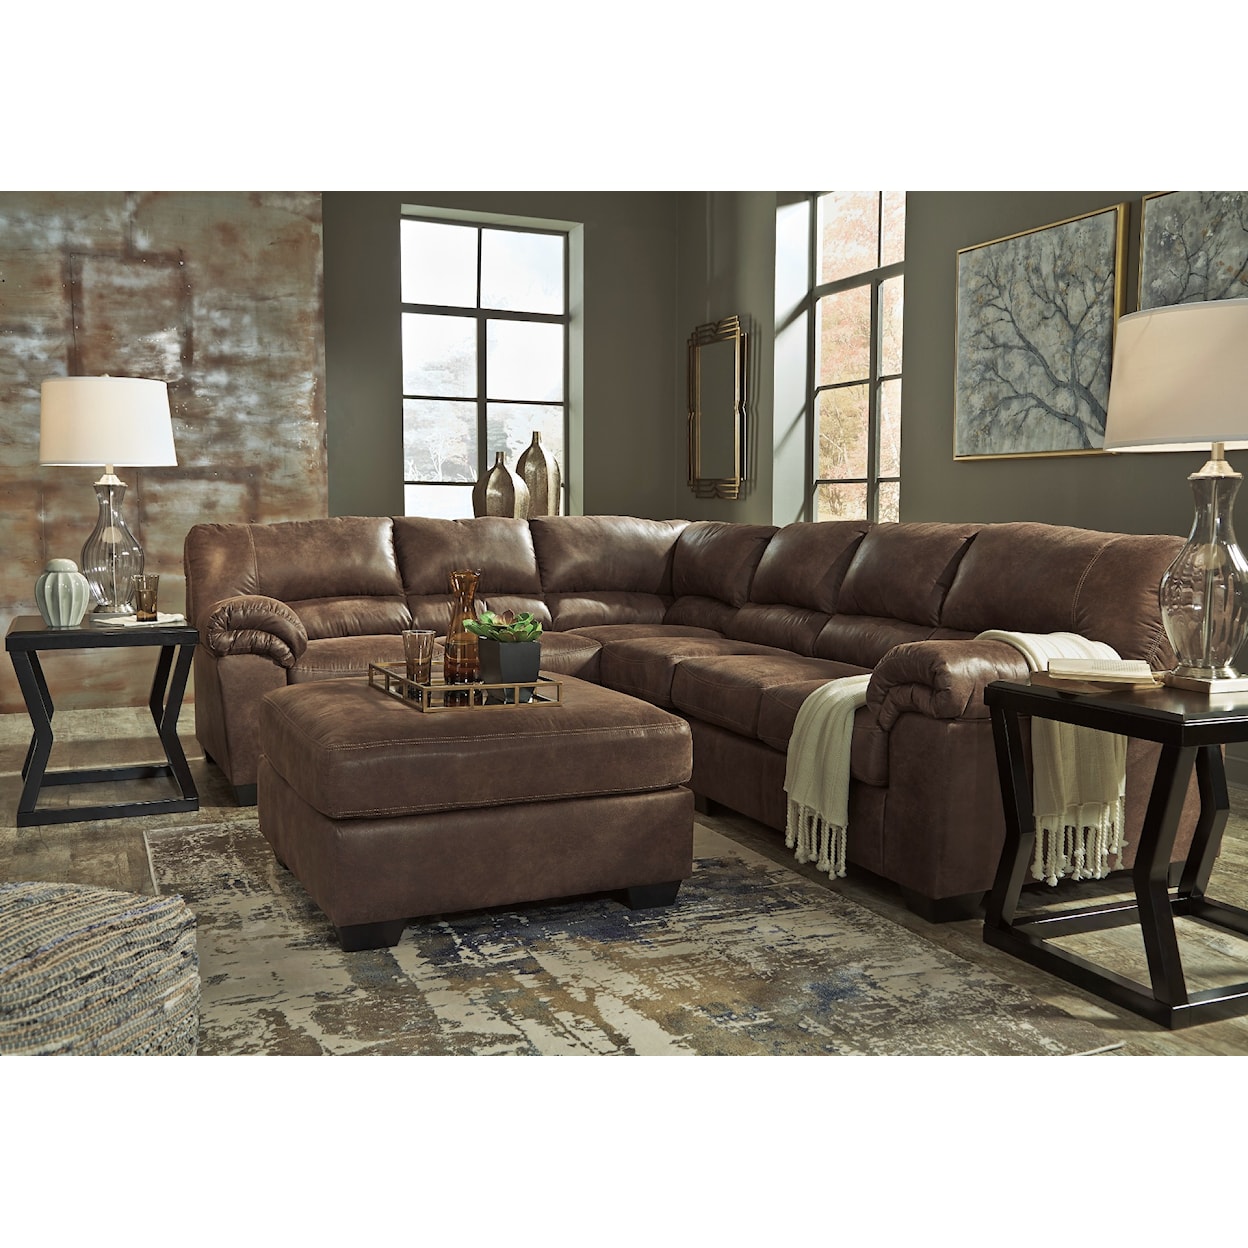 Signature Design by Ashley Bladen 3-Piece Sectional